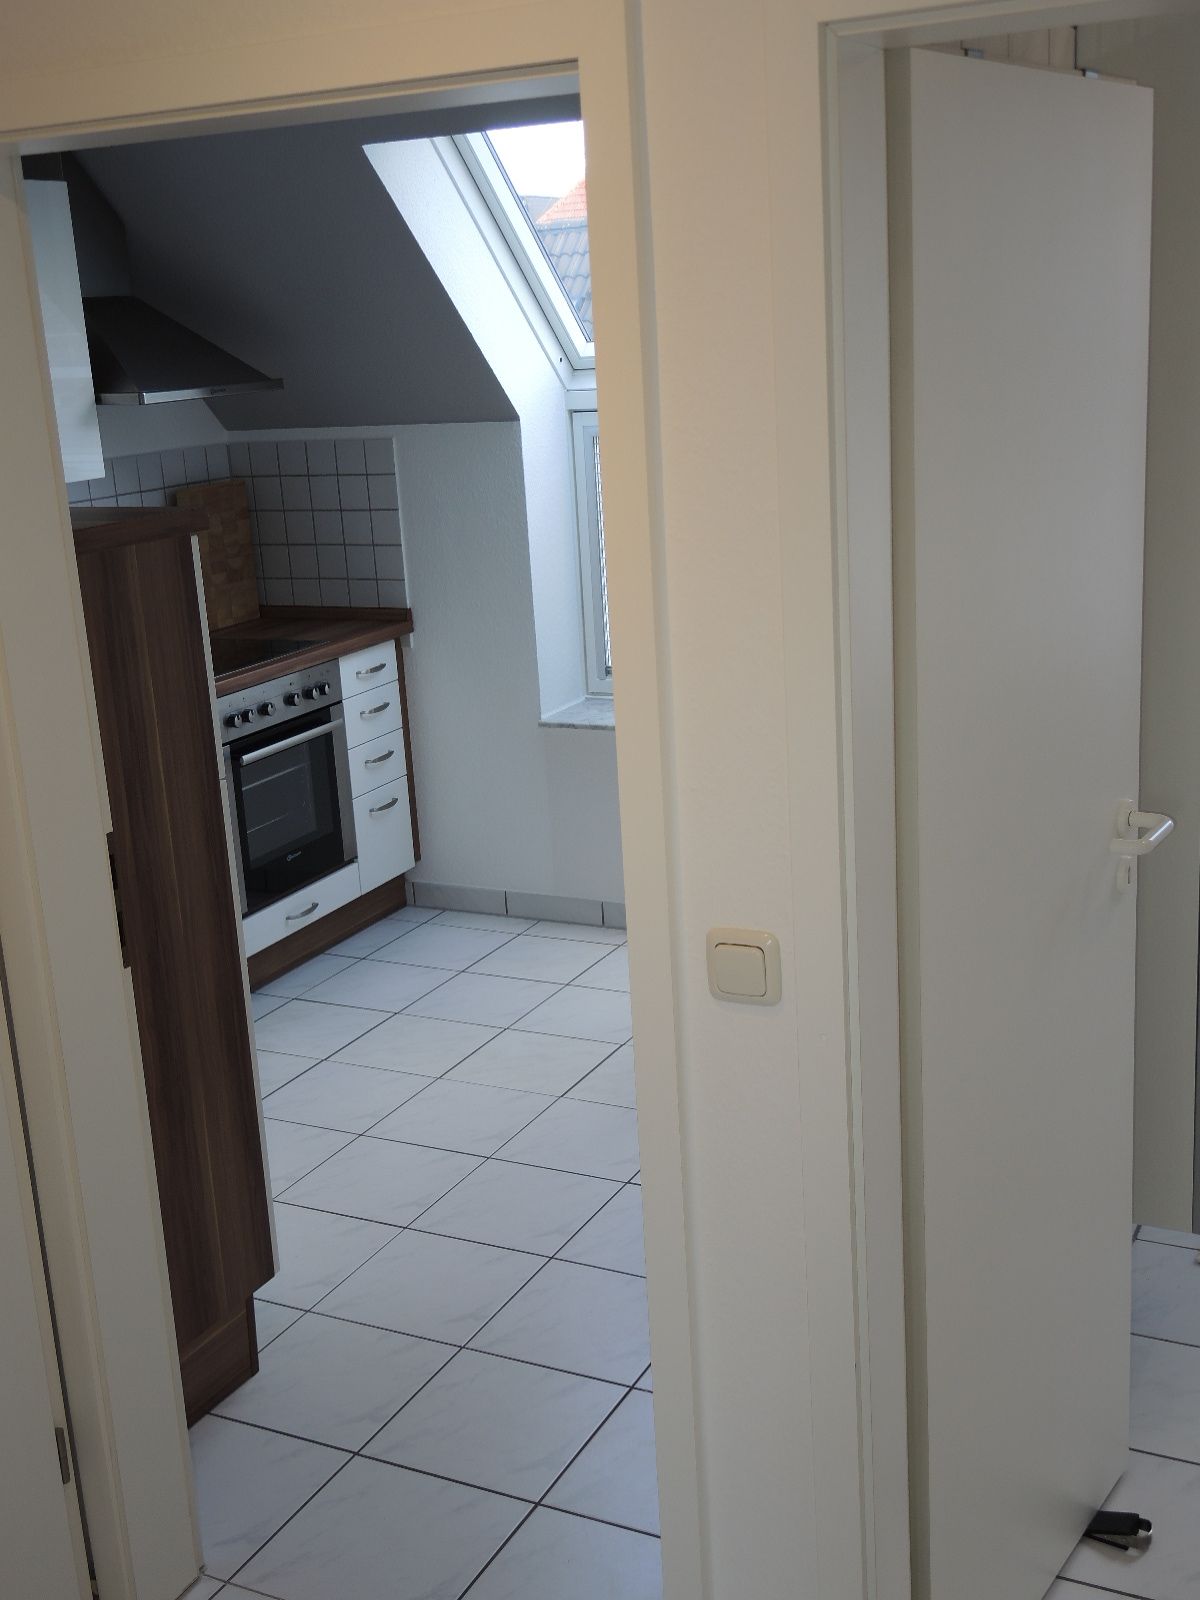 2 Zi-Maisonette-Wgh air conditioning balcony Severinsviertel compl furnished bright quiet near CBS all inclusive